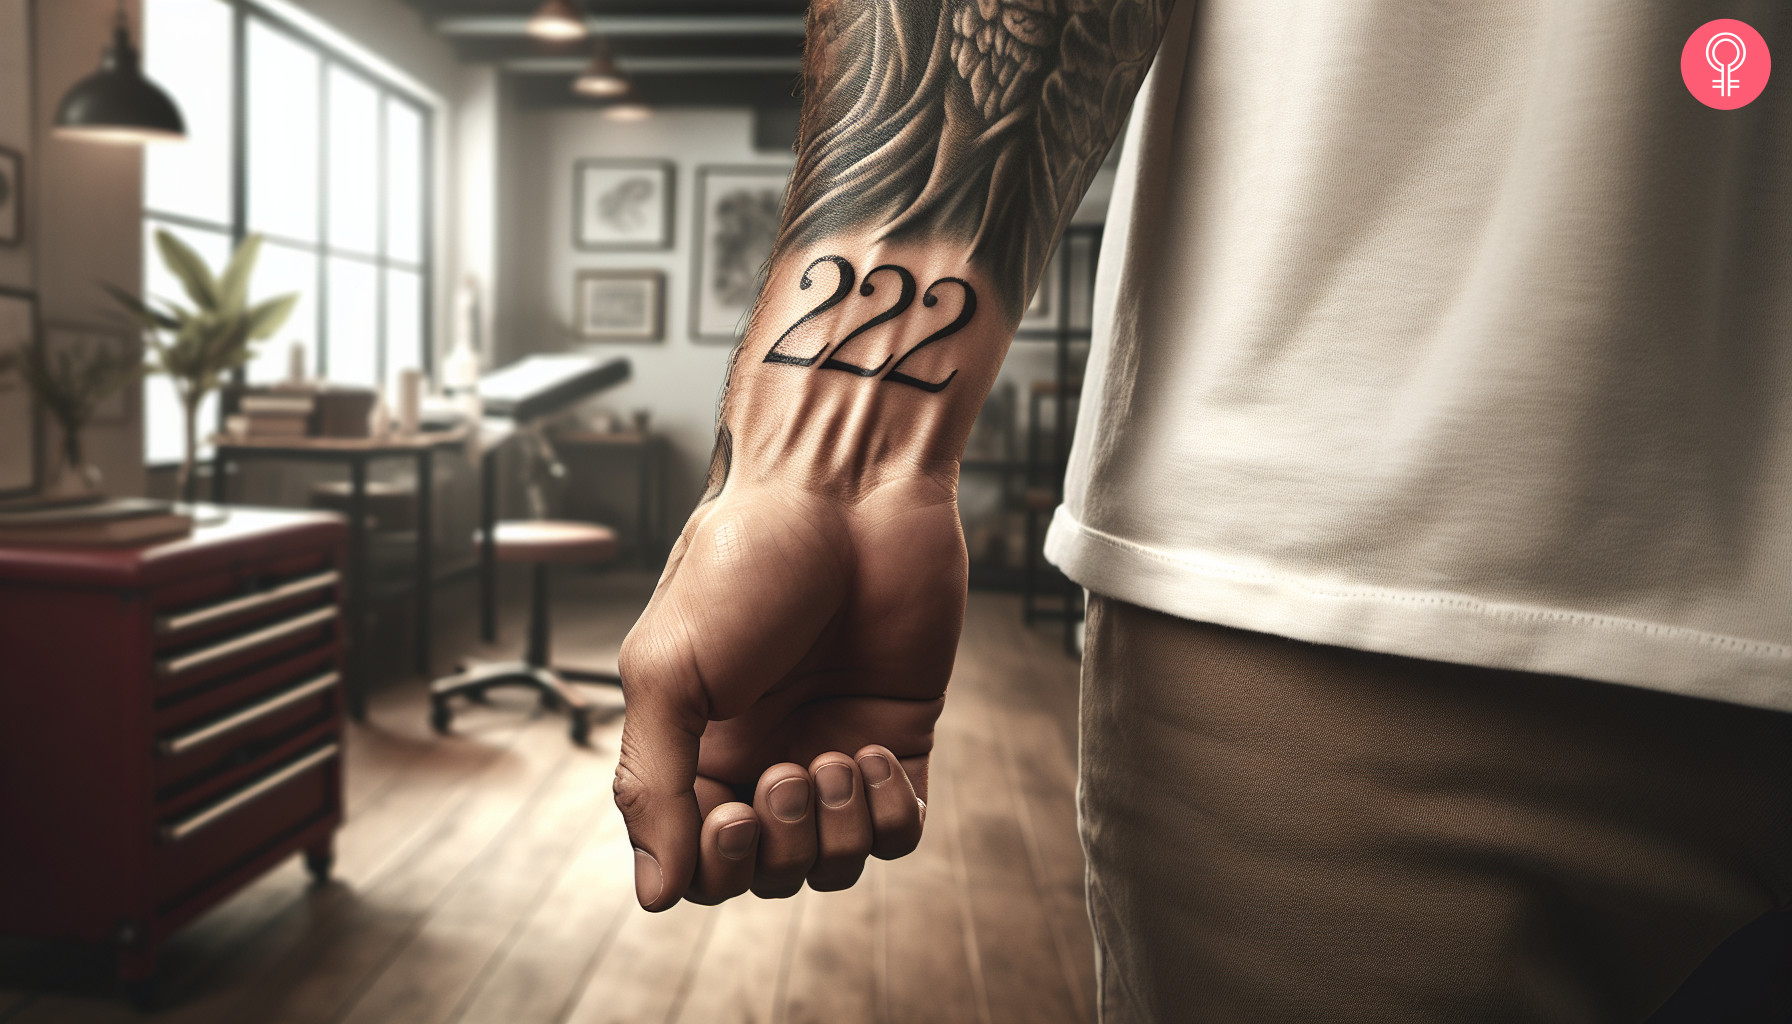 222 angel number tattoo on the wrist of a man